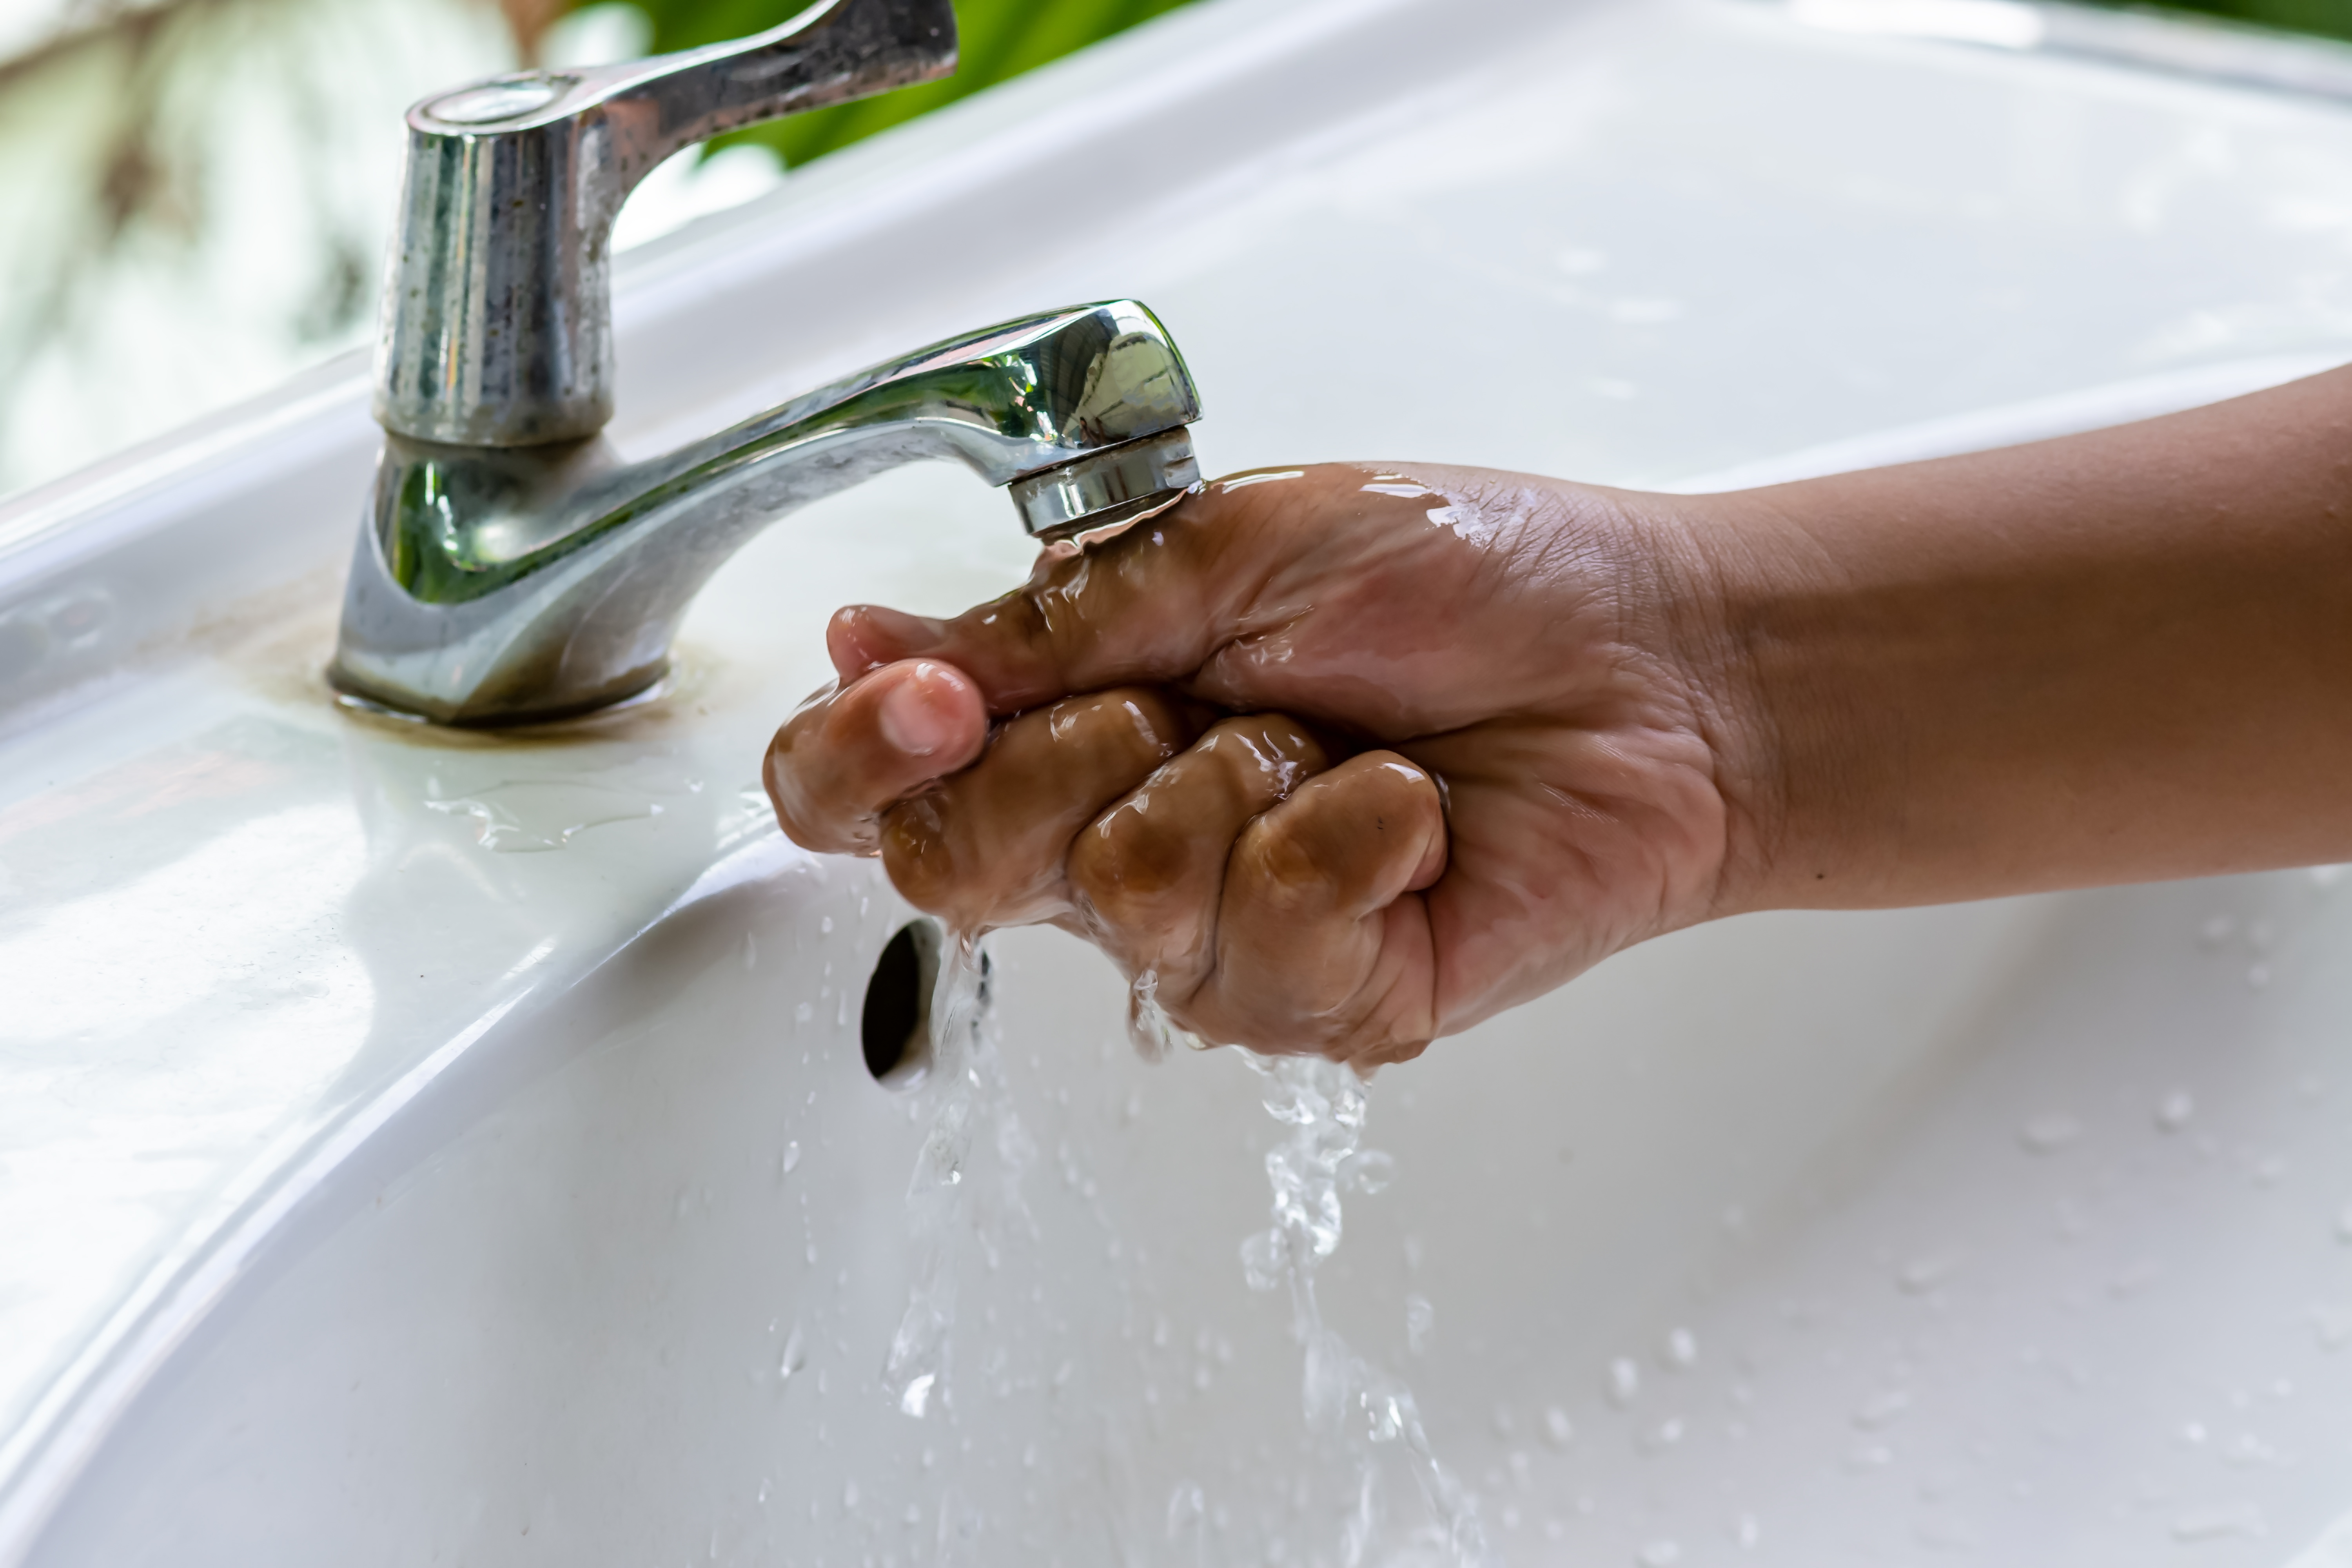 A hand with short nails runs under a water faucet in a white sink.